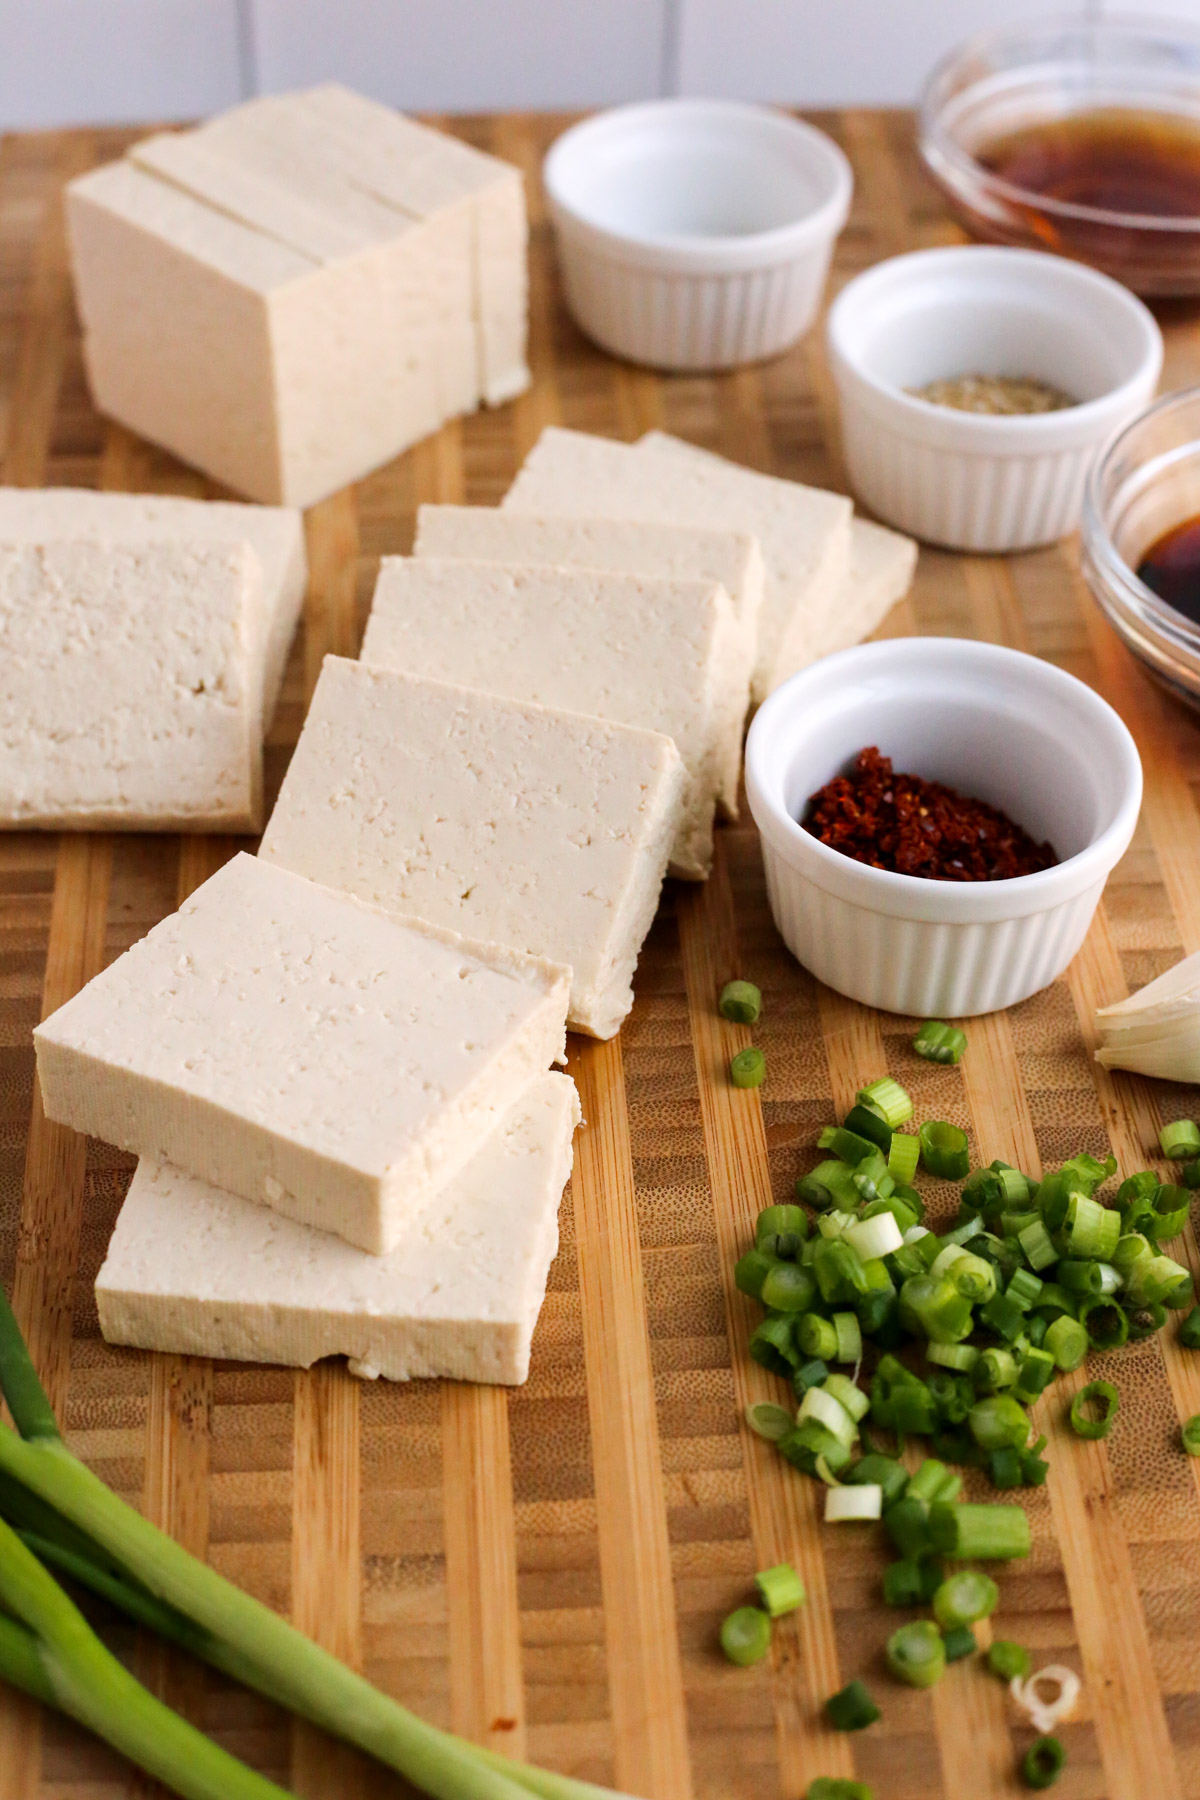 A block of tofu is sliced into thick squares and displayed on a butcher block cutting board, surrounded by sliced green onions, red chili flakes, and small ramekins with additional ingredients for dubu jorim